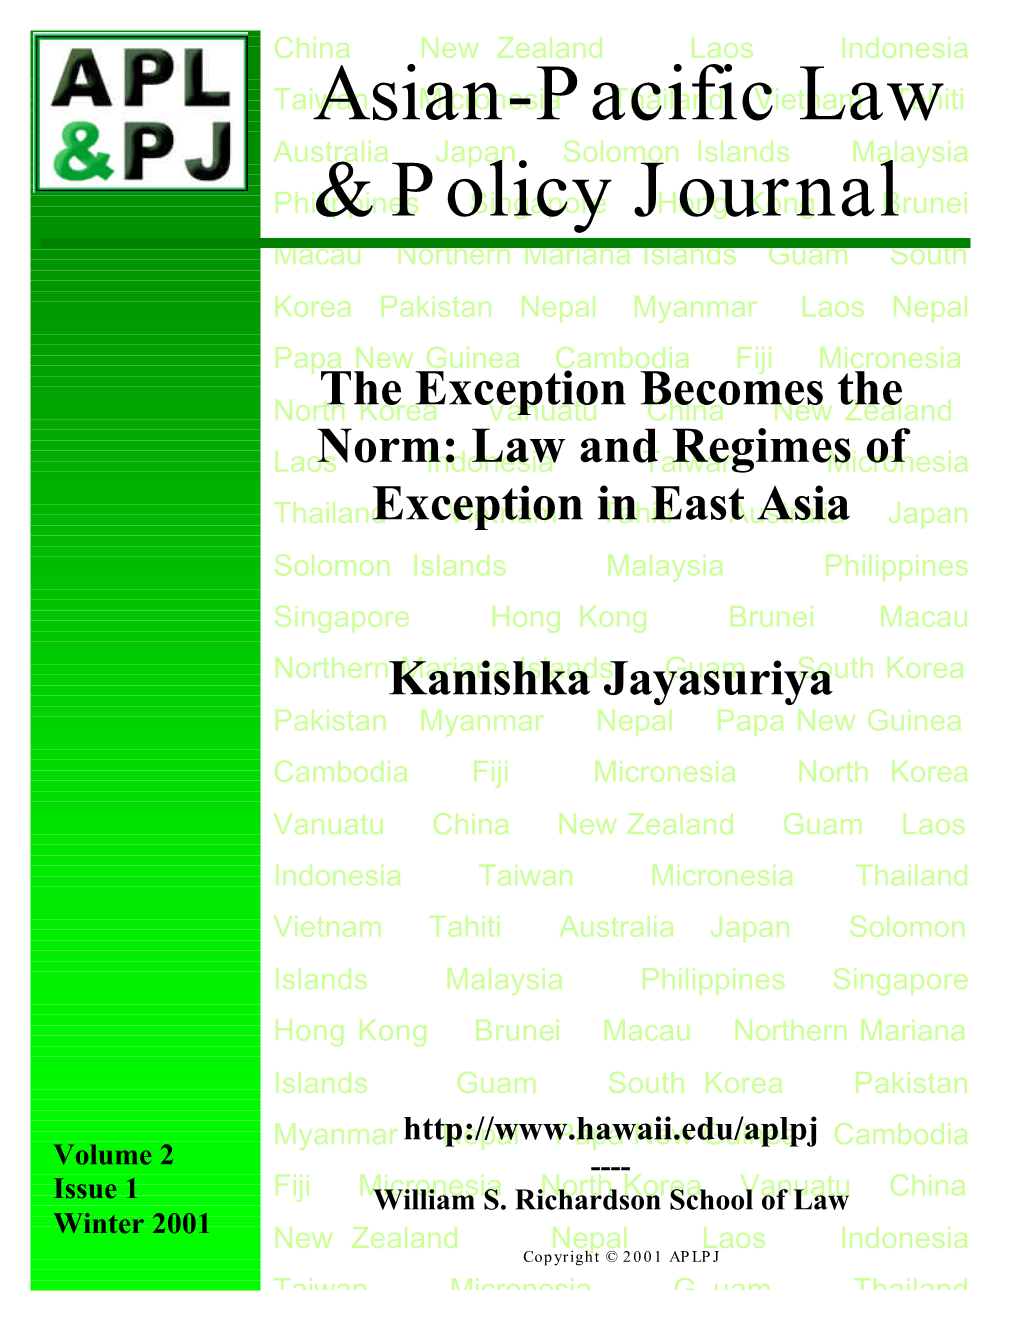 The Exception Becomes the Norm: Law and Regimes of Exception in East Asia Kanishka Jayasuriya*